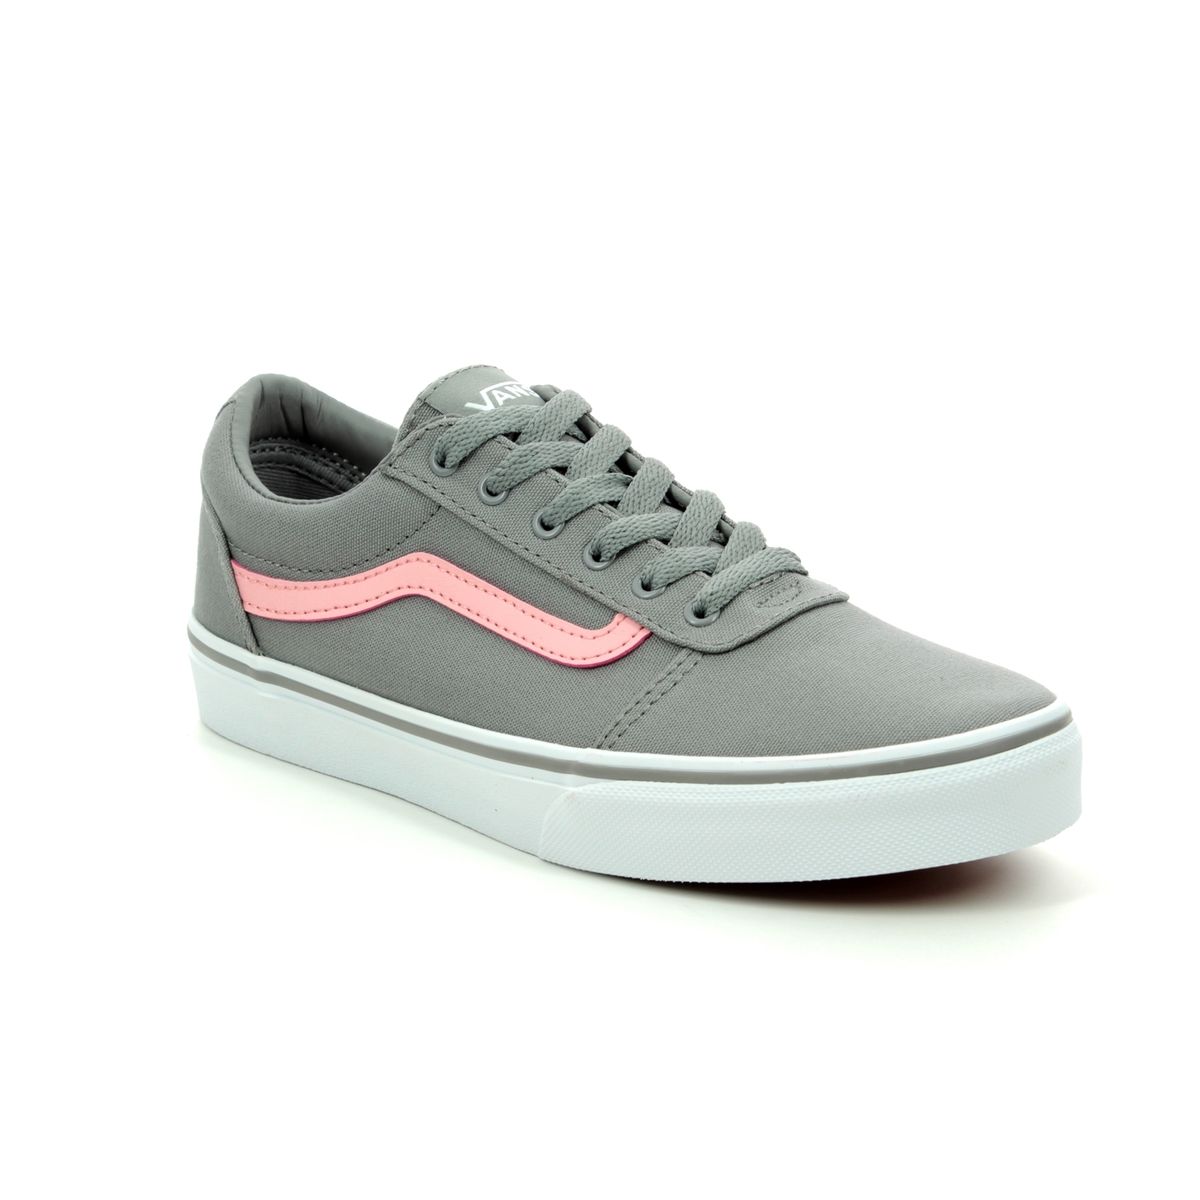 are the vans pink or grey